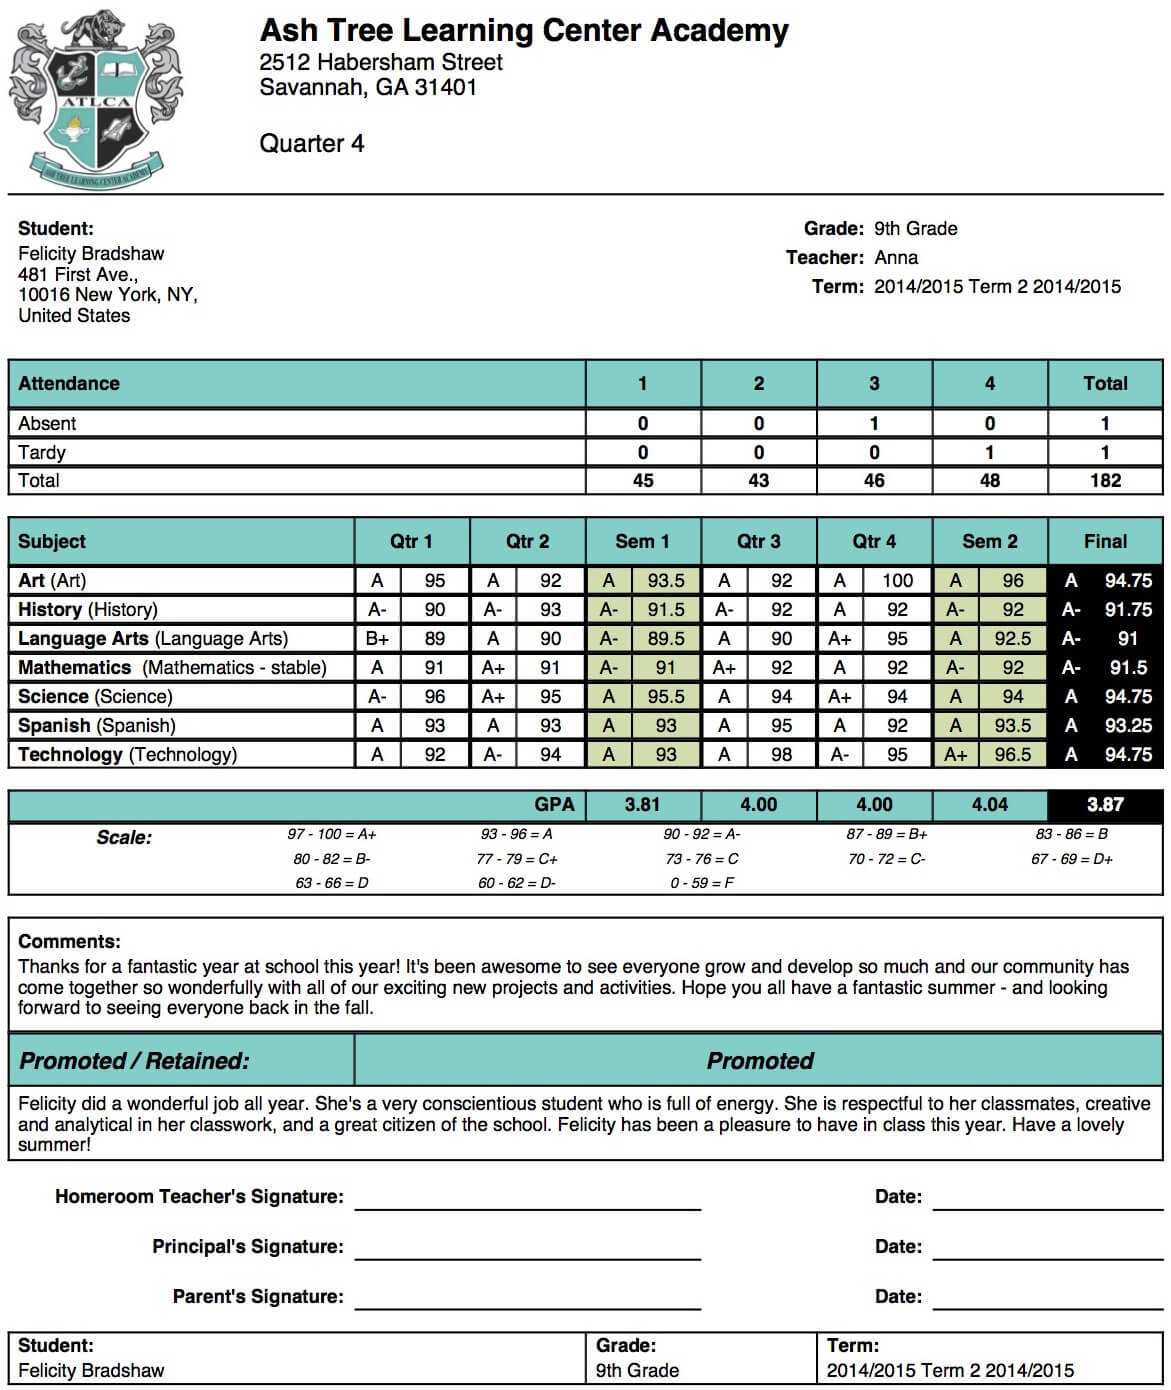 Ash Tree Learning Center Academy Report Card Template With Regard To Student Information Card Template